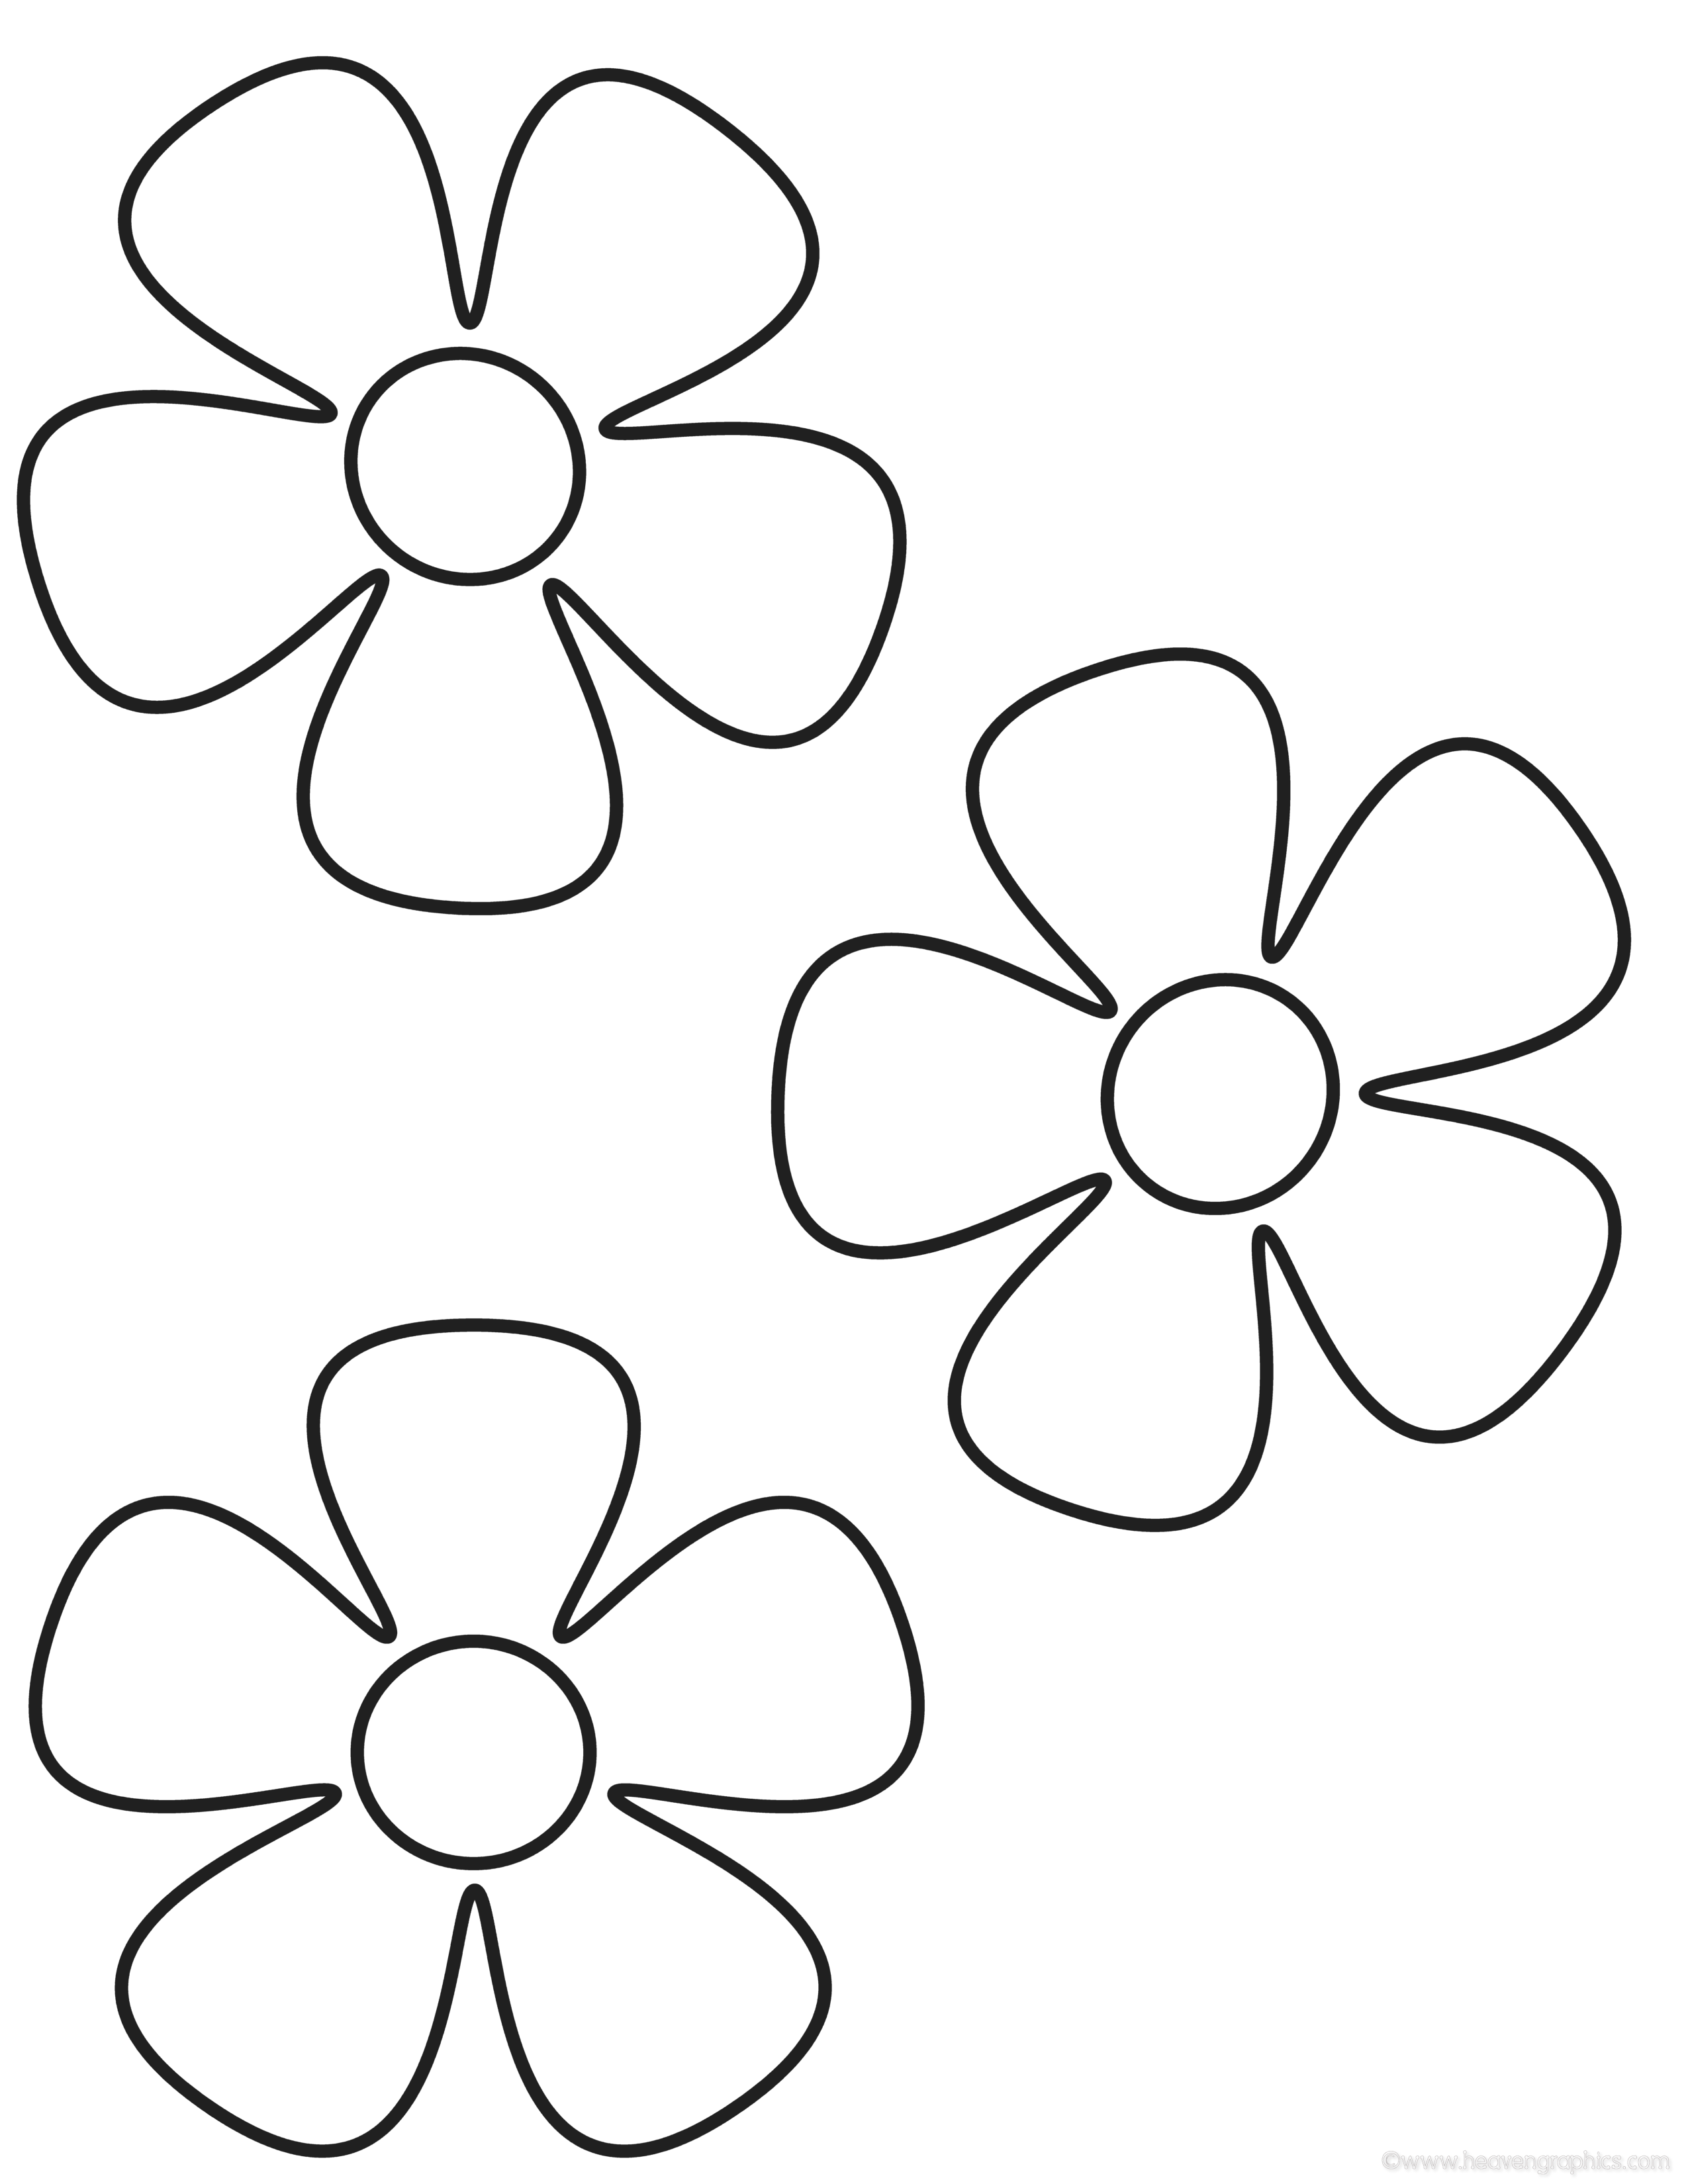 Simple Flower Colouring Pages | Printable Coloring Pages